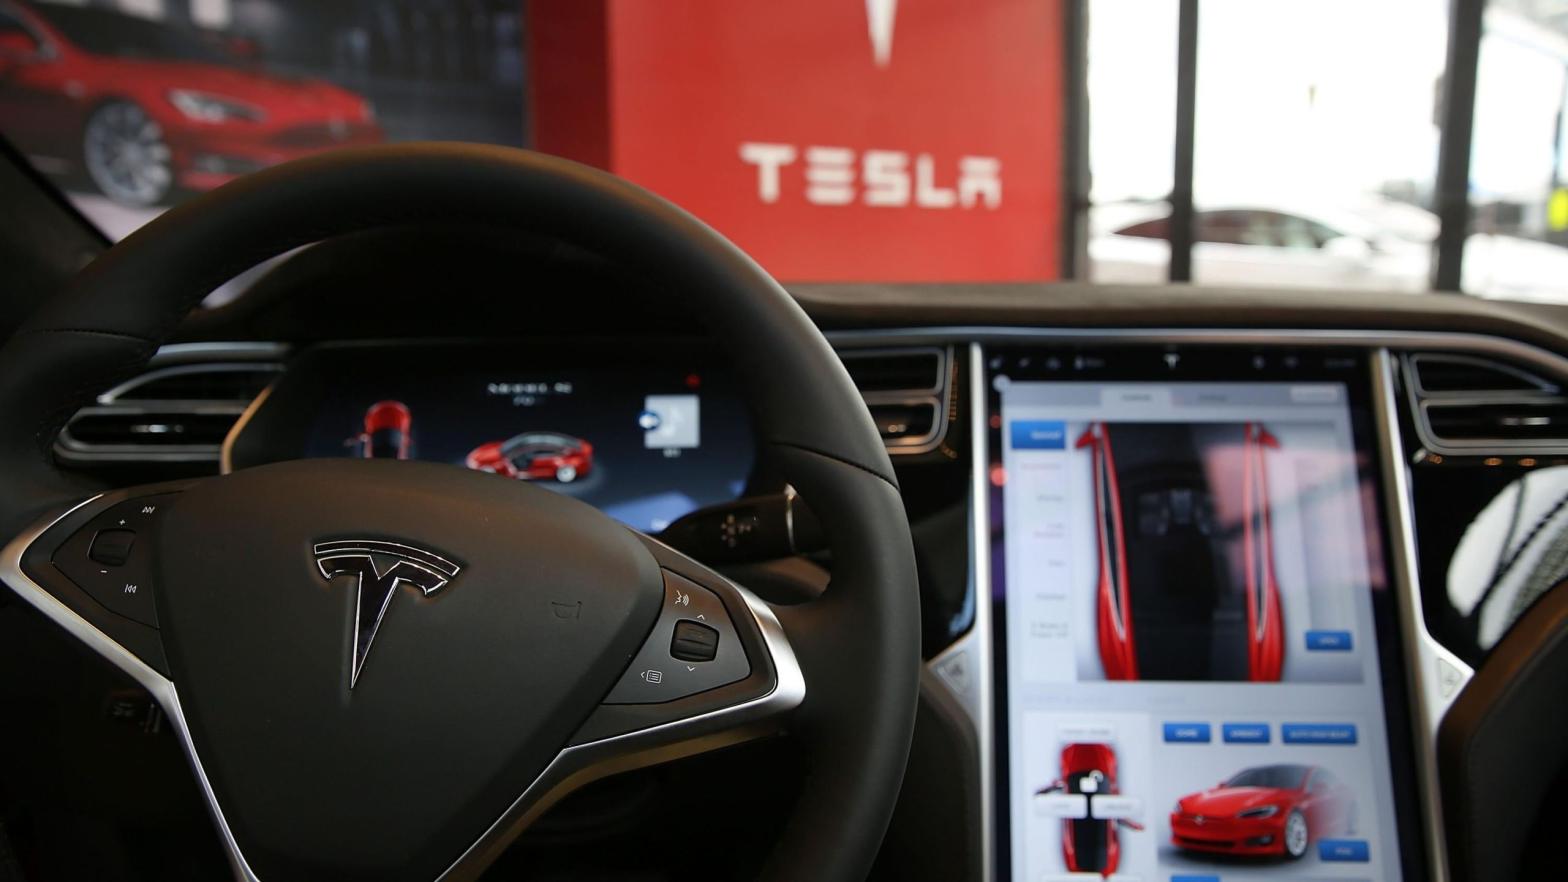 The console of a Tesla seen at a showroom in Red Hook, Brooklyn in 2016. (Photo: Spencer Platt, Getty Images)